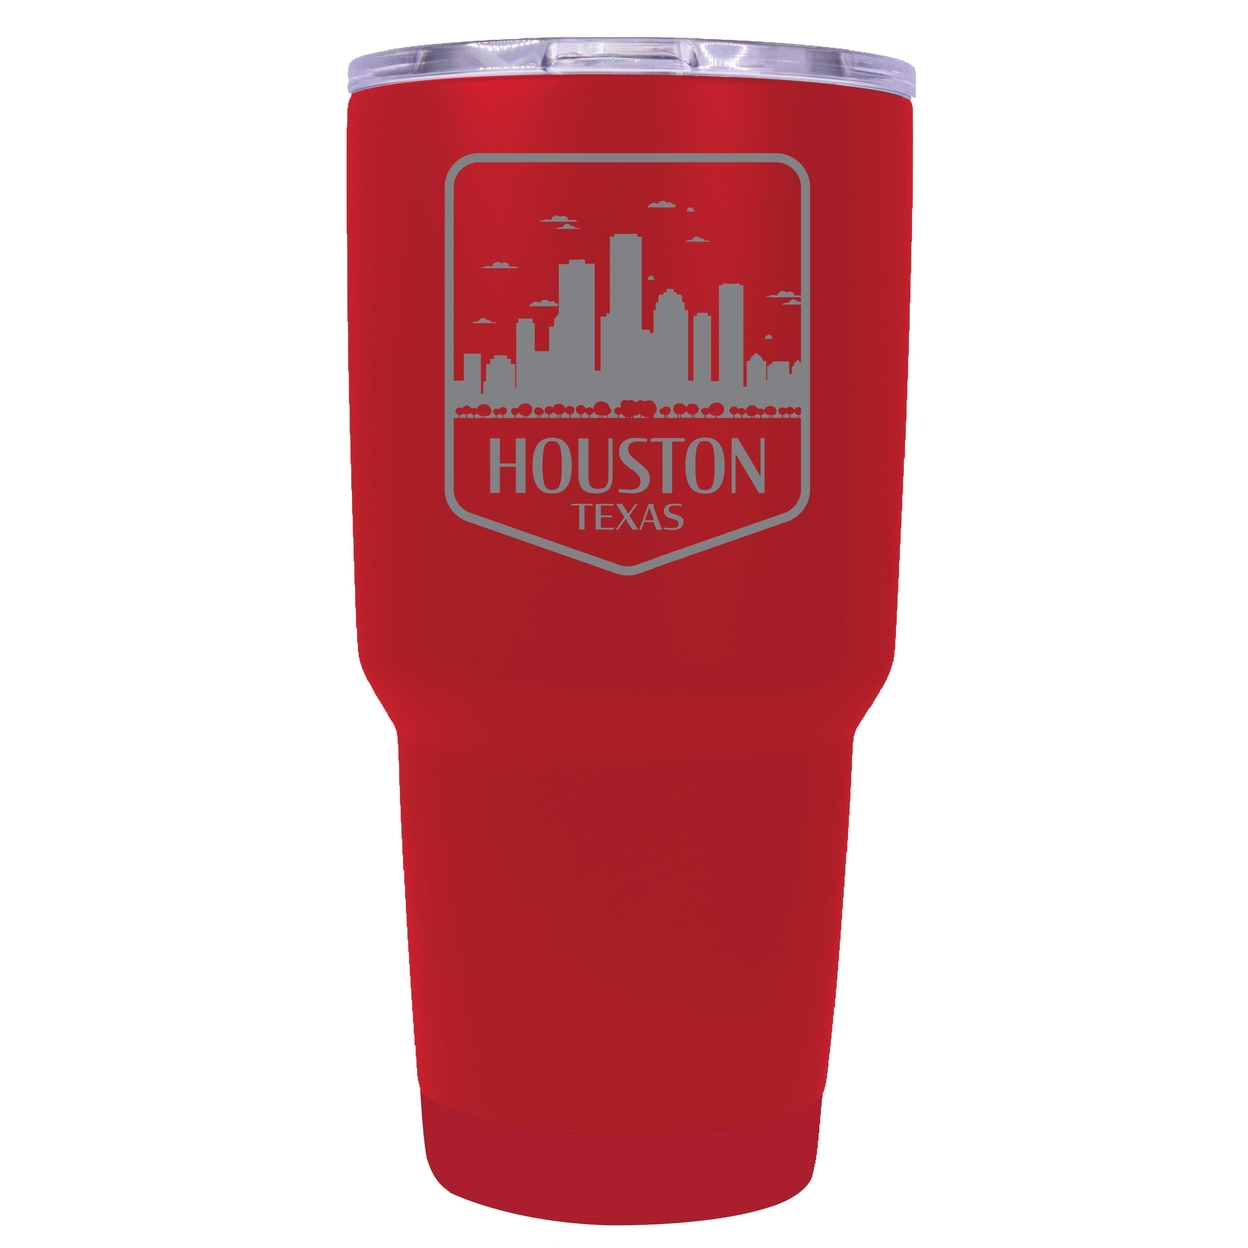 Houston Texas Souvenir 24 Oz Engraved Insulated Stainless Steel Tumbler - Red,,4-Pack